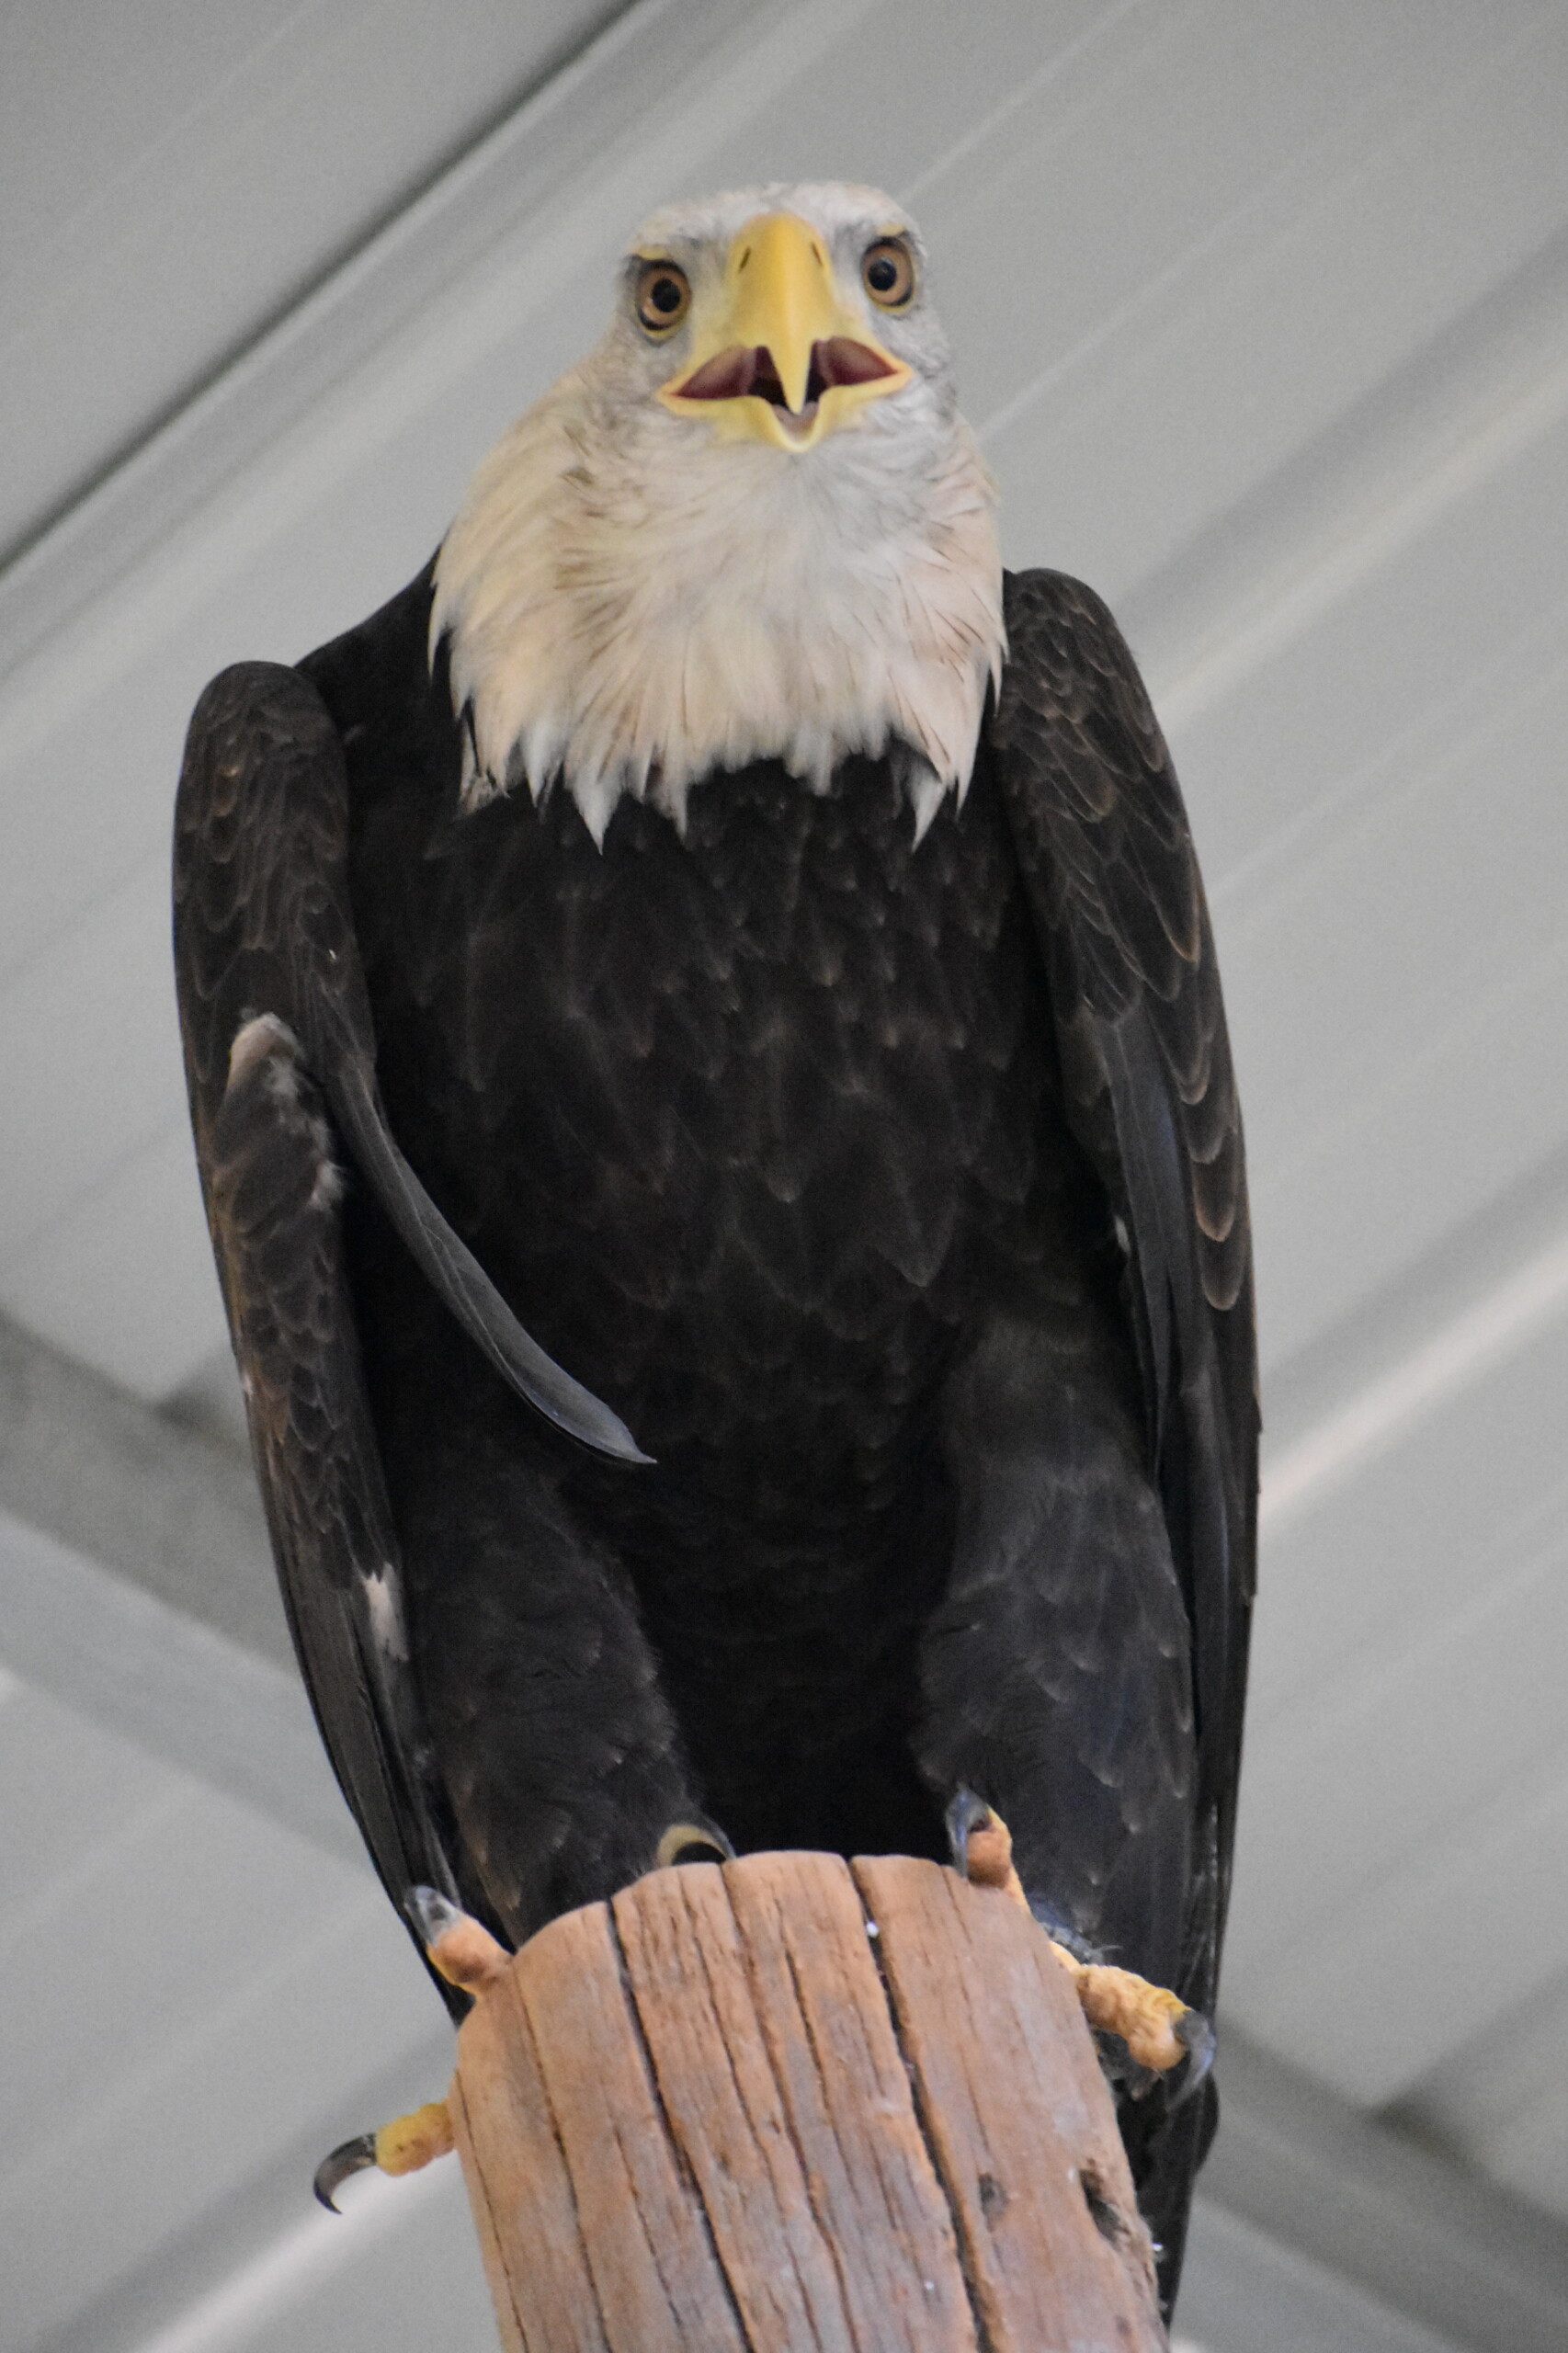 Full sized image of Hannah the bald eagle looking cute on her perch